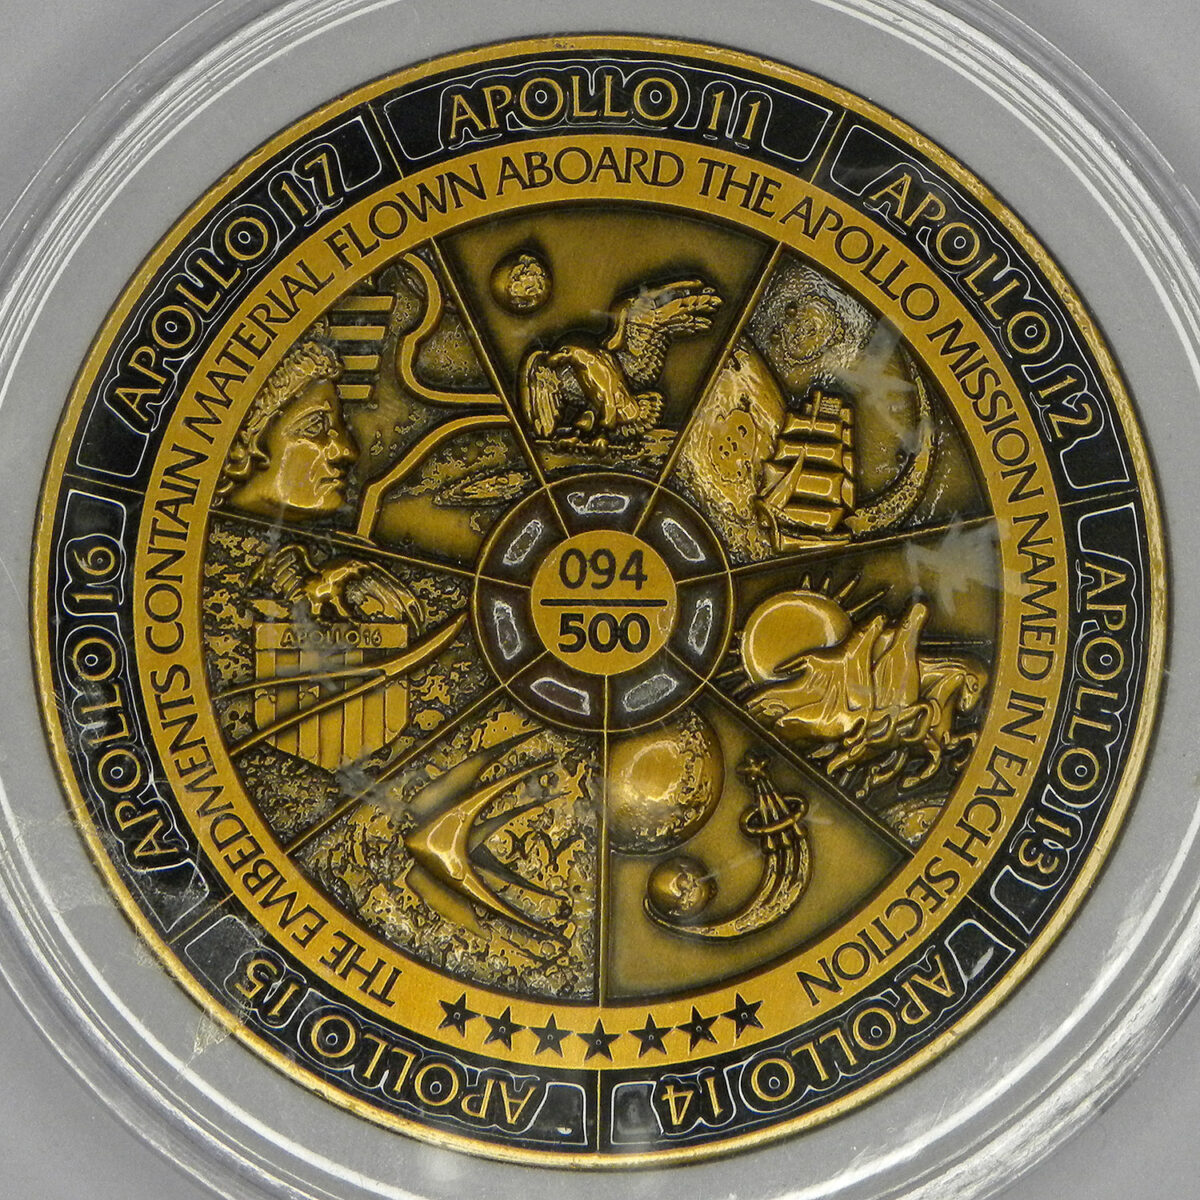 Apollo Missions medal with flown material (obverse)